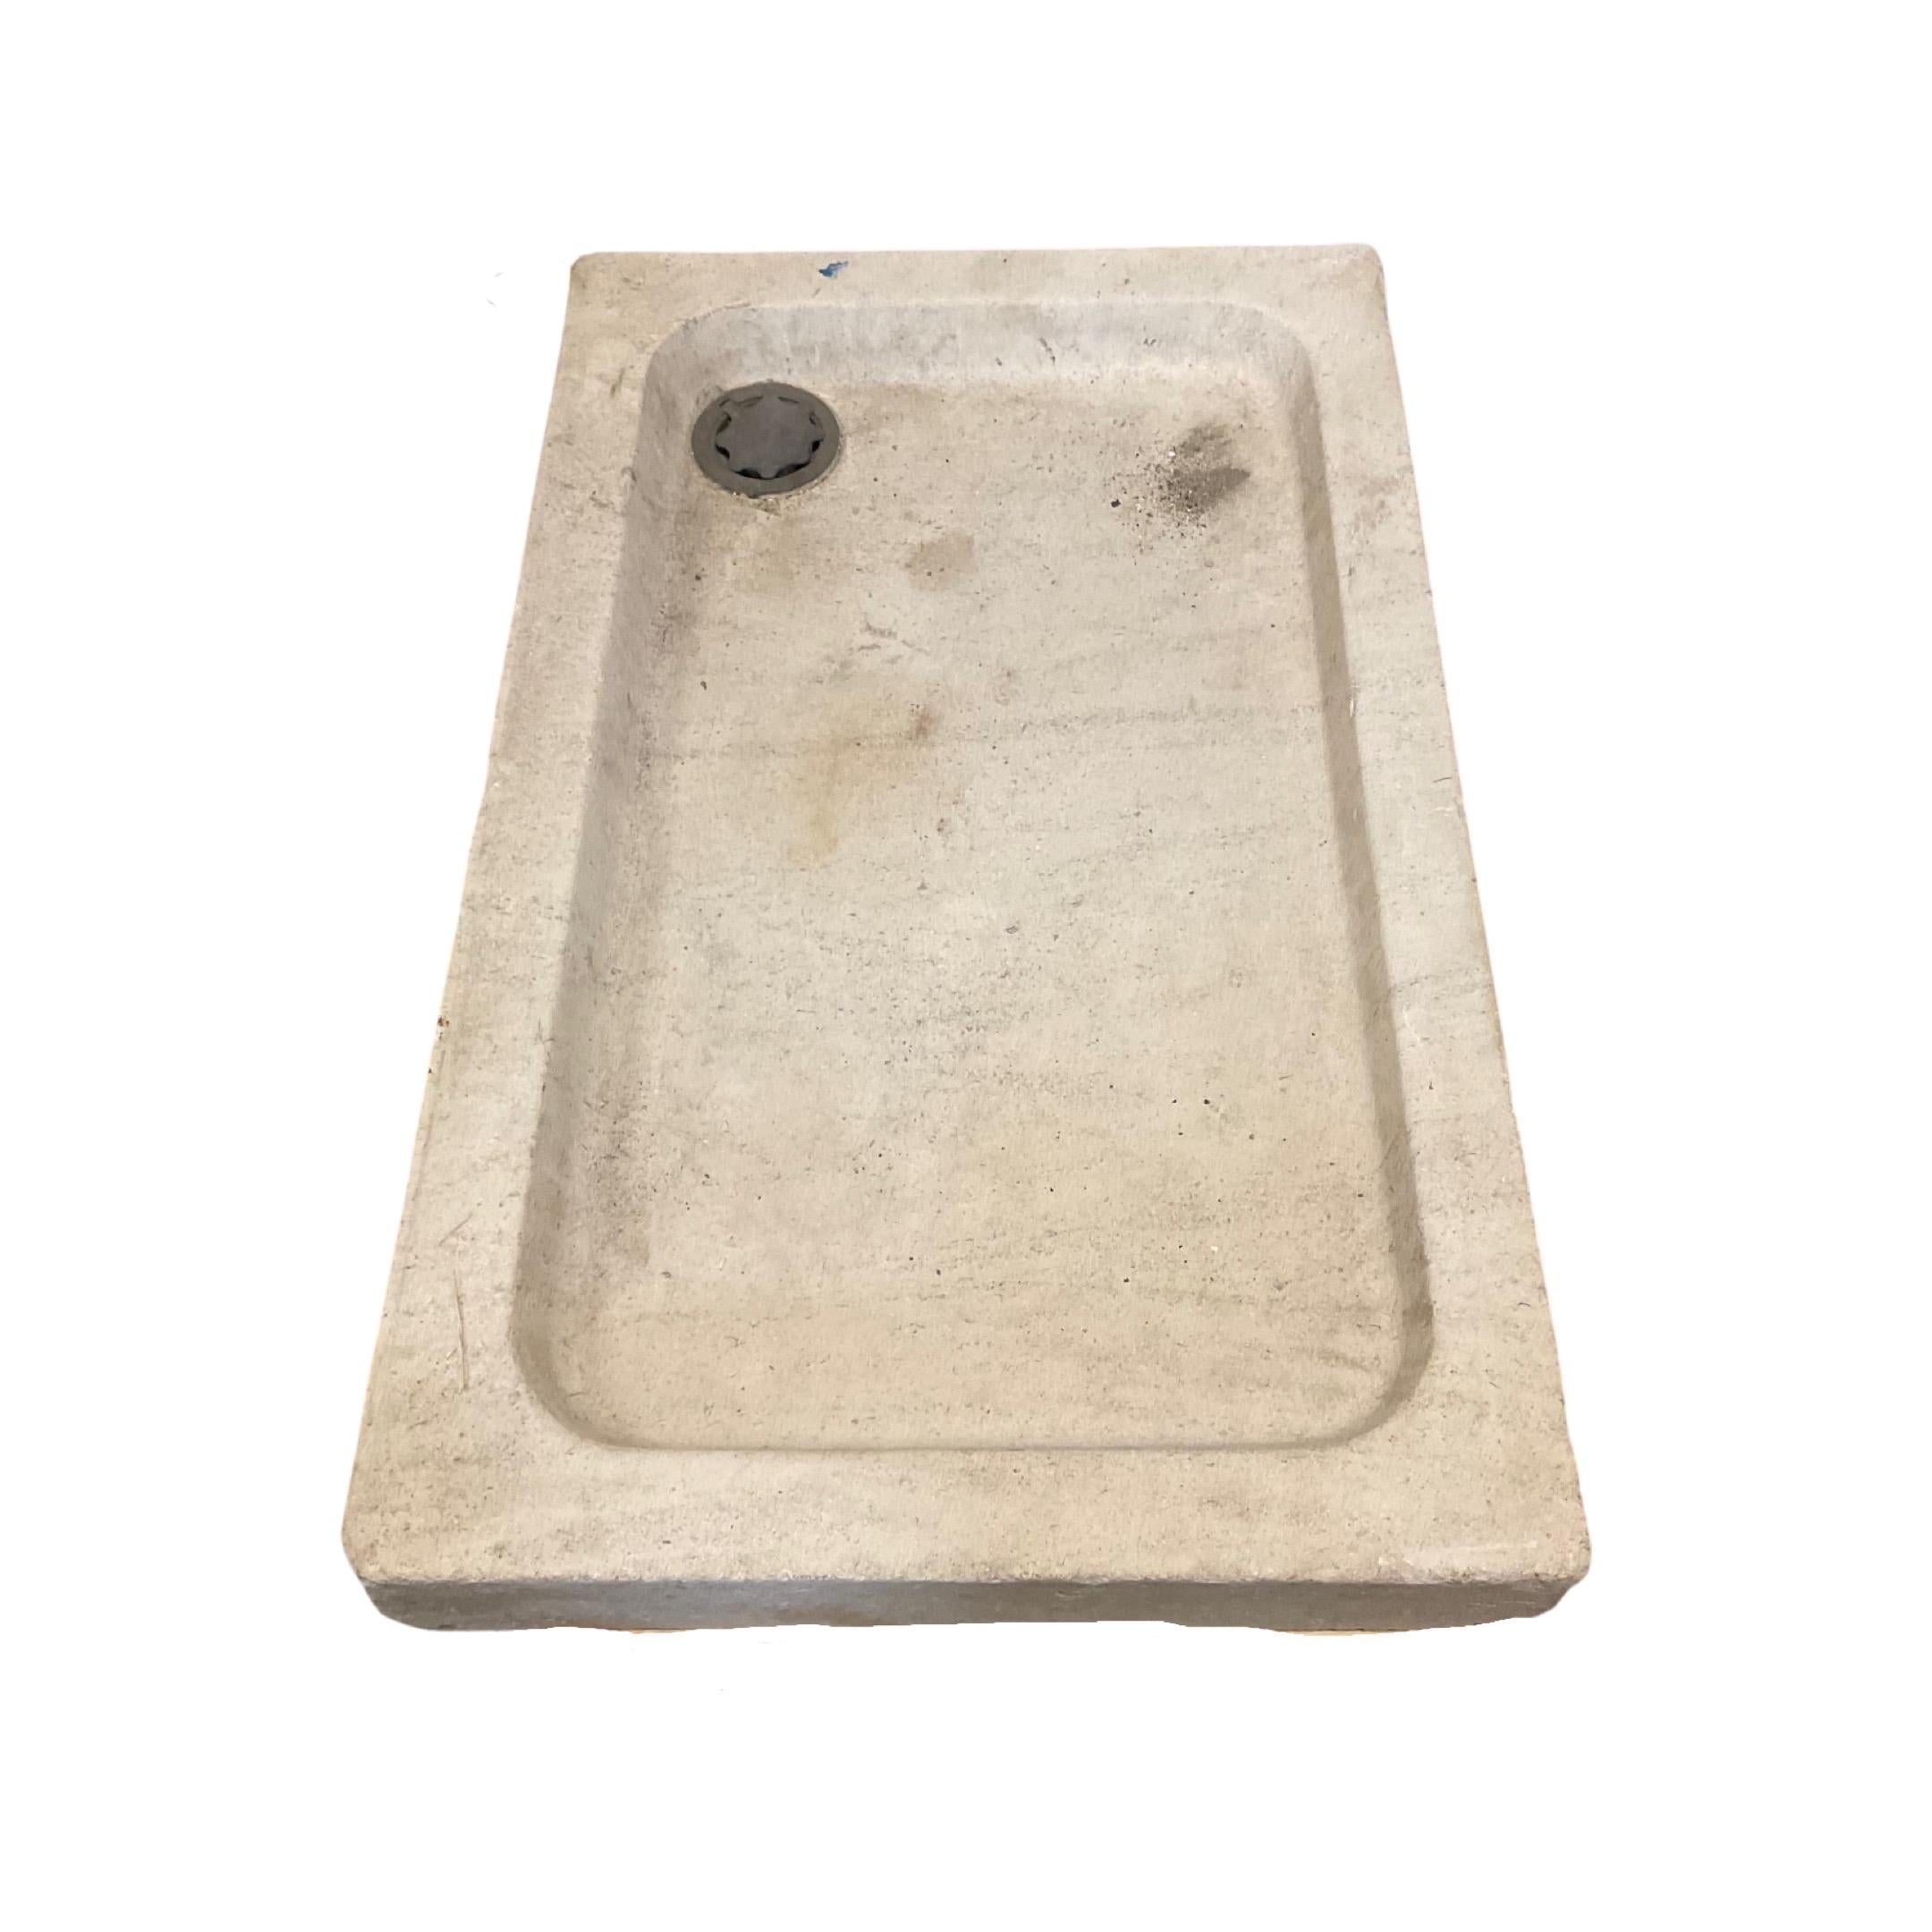 This French limestone sink is a classic piece of craftsmanship from the 19th century. Crafted from strong and durable limestone and originating from France, its resiliency will ensure it lasts for many years. This timeless beauty will add a touch of